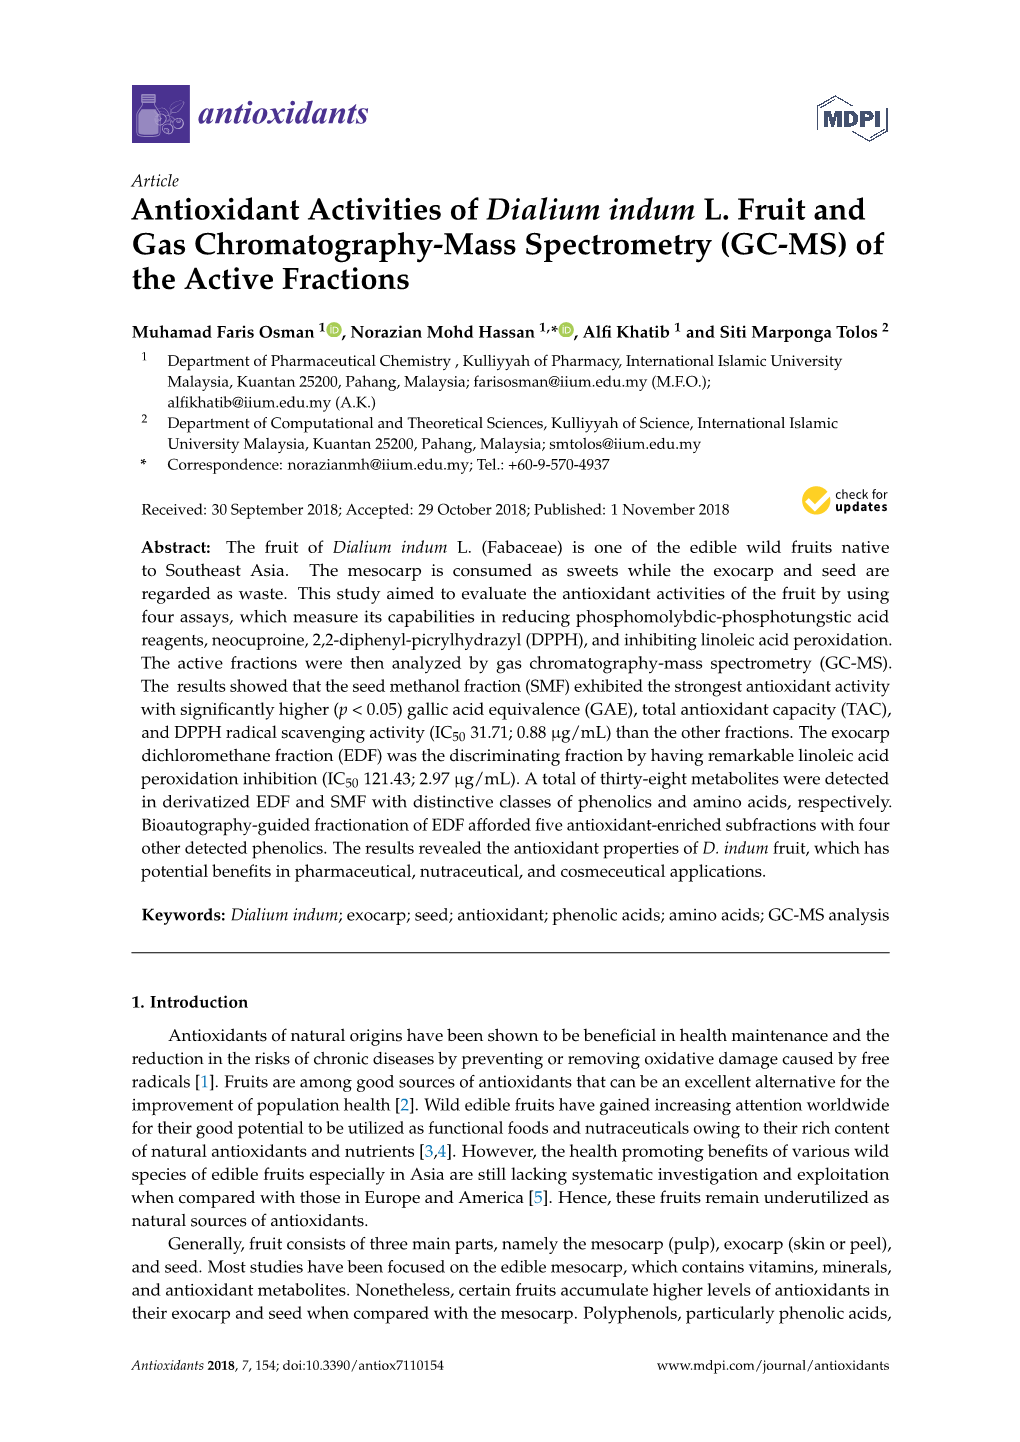 Antioxidant Activities of Dialium Indum L. Fruit and Gas Chromatography-Mass Spectrometry (GC-MS) of the Active Fractions